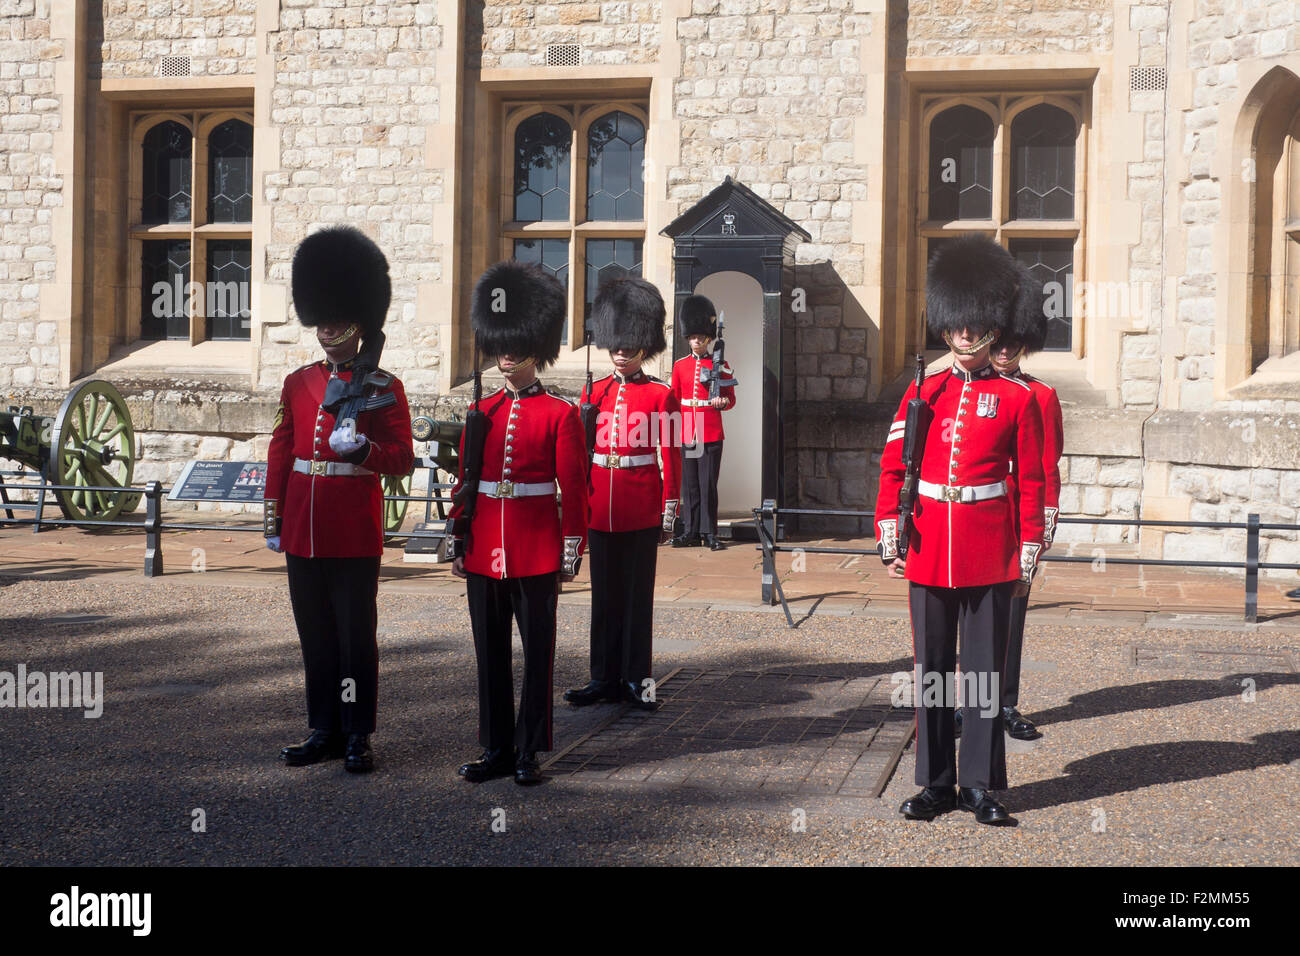 Ceremony of the Word with Guardsmen wearing bearskins at the Tower of London City of London England UK Stock Photo